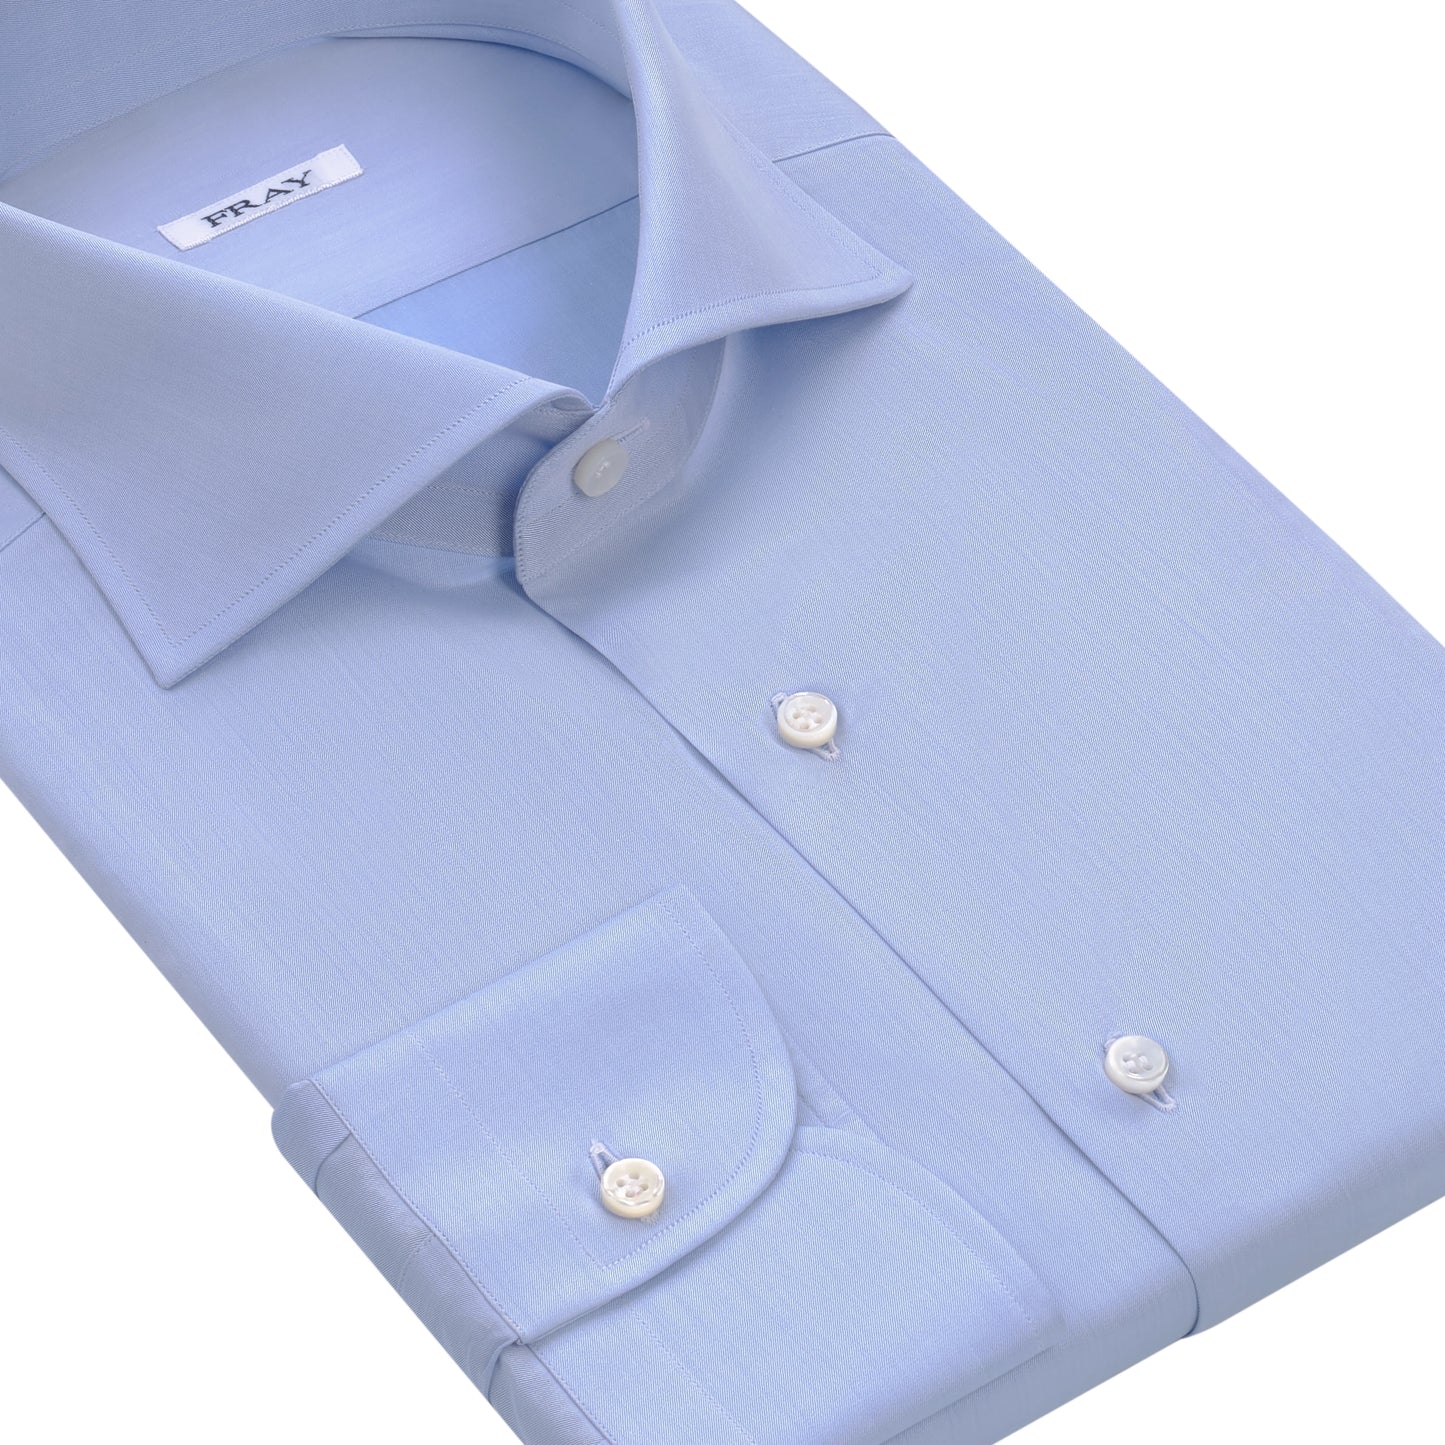 Classic Cotton Shirt in Light Blue with Cutaway Collar